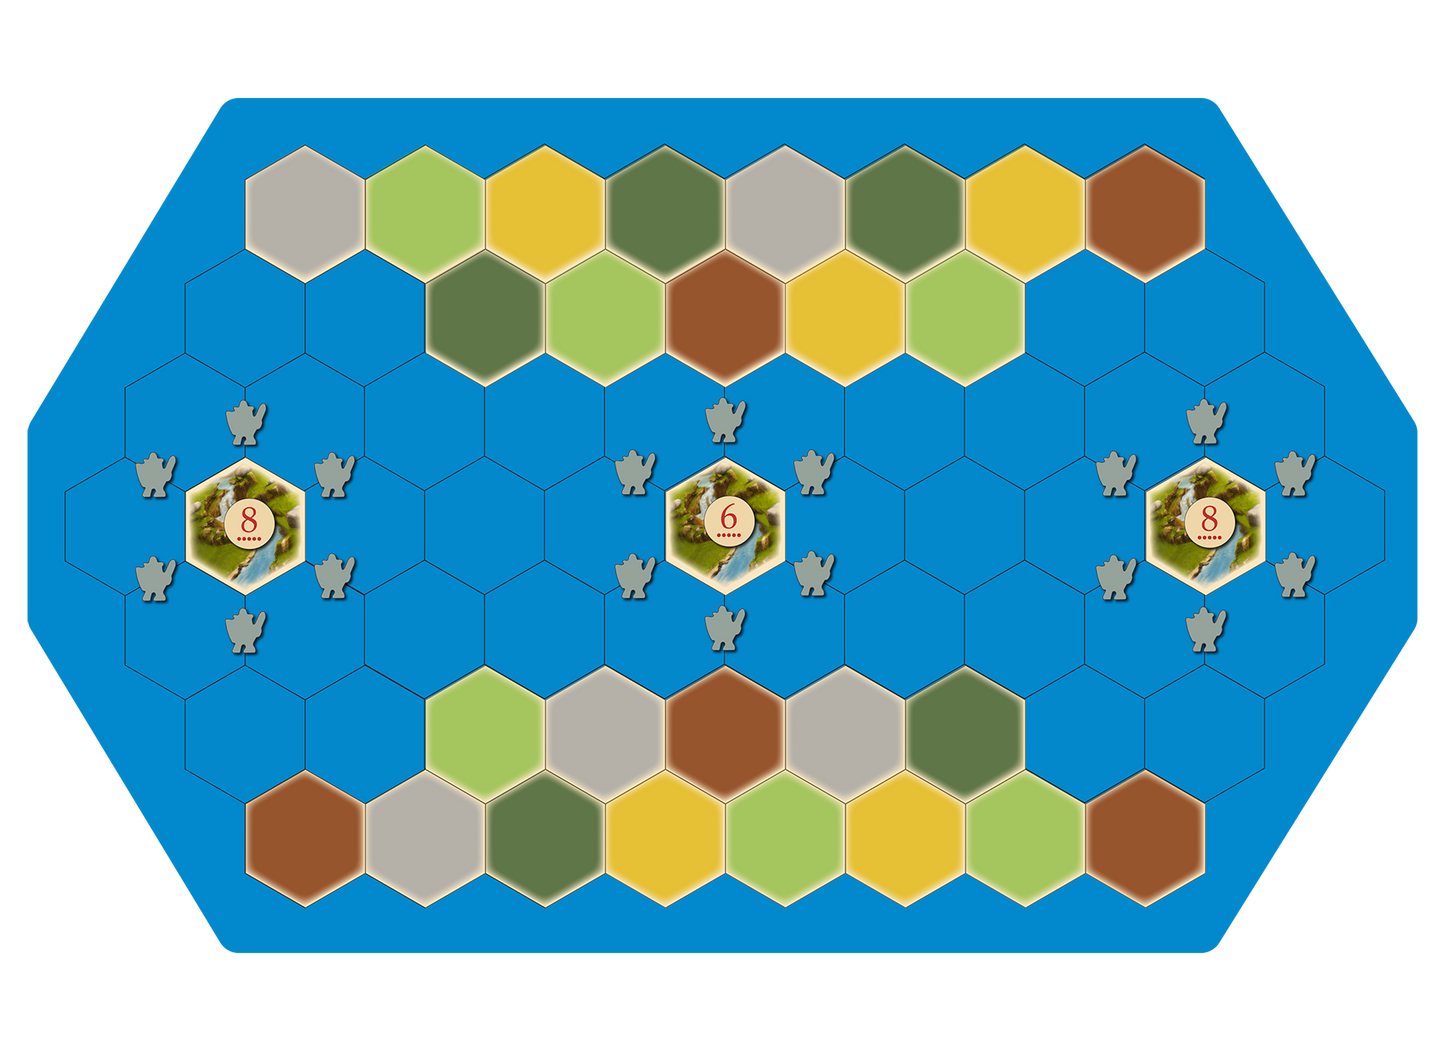 Dark Knights Scenario compatible with Catan's Settlers of Catan and Seafarers